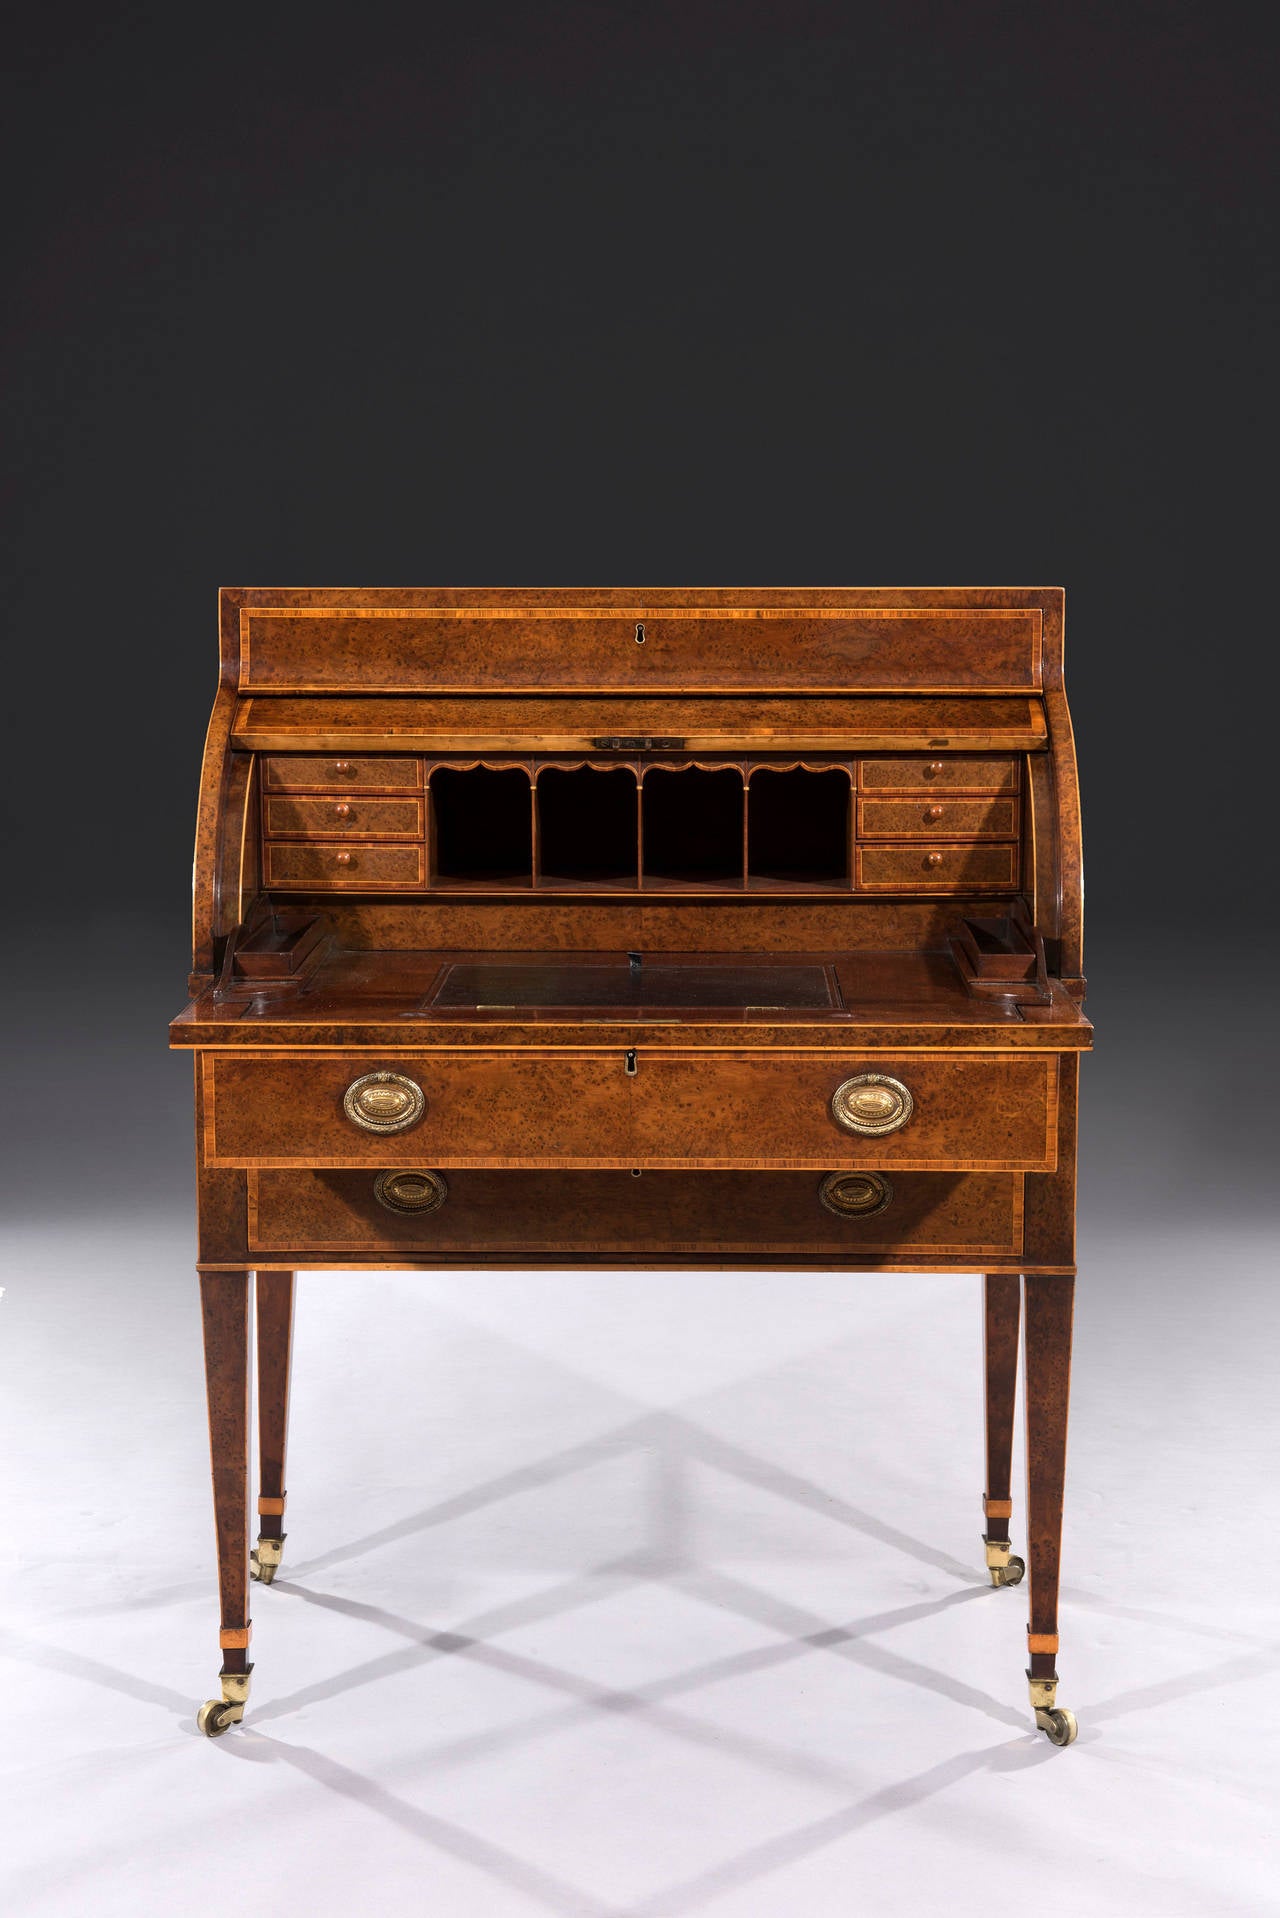 The bureau is very close to a design on pl. 47 of Sheraton's Drawing Book. The roll-top cylinder reveals a yew wood veneered secretaire interior. The top drawer slides out as the top rolls up. The full length drawer below stands on four tapered